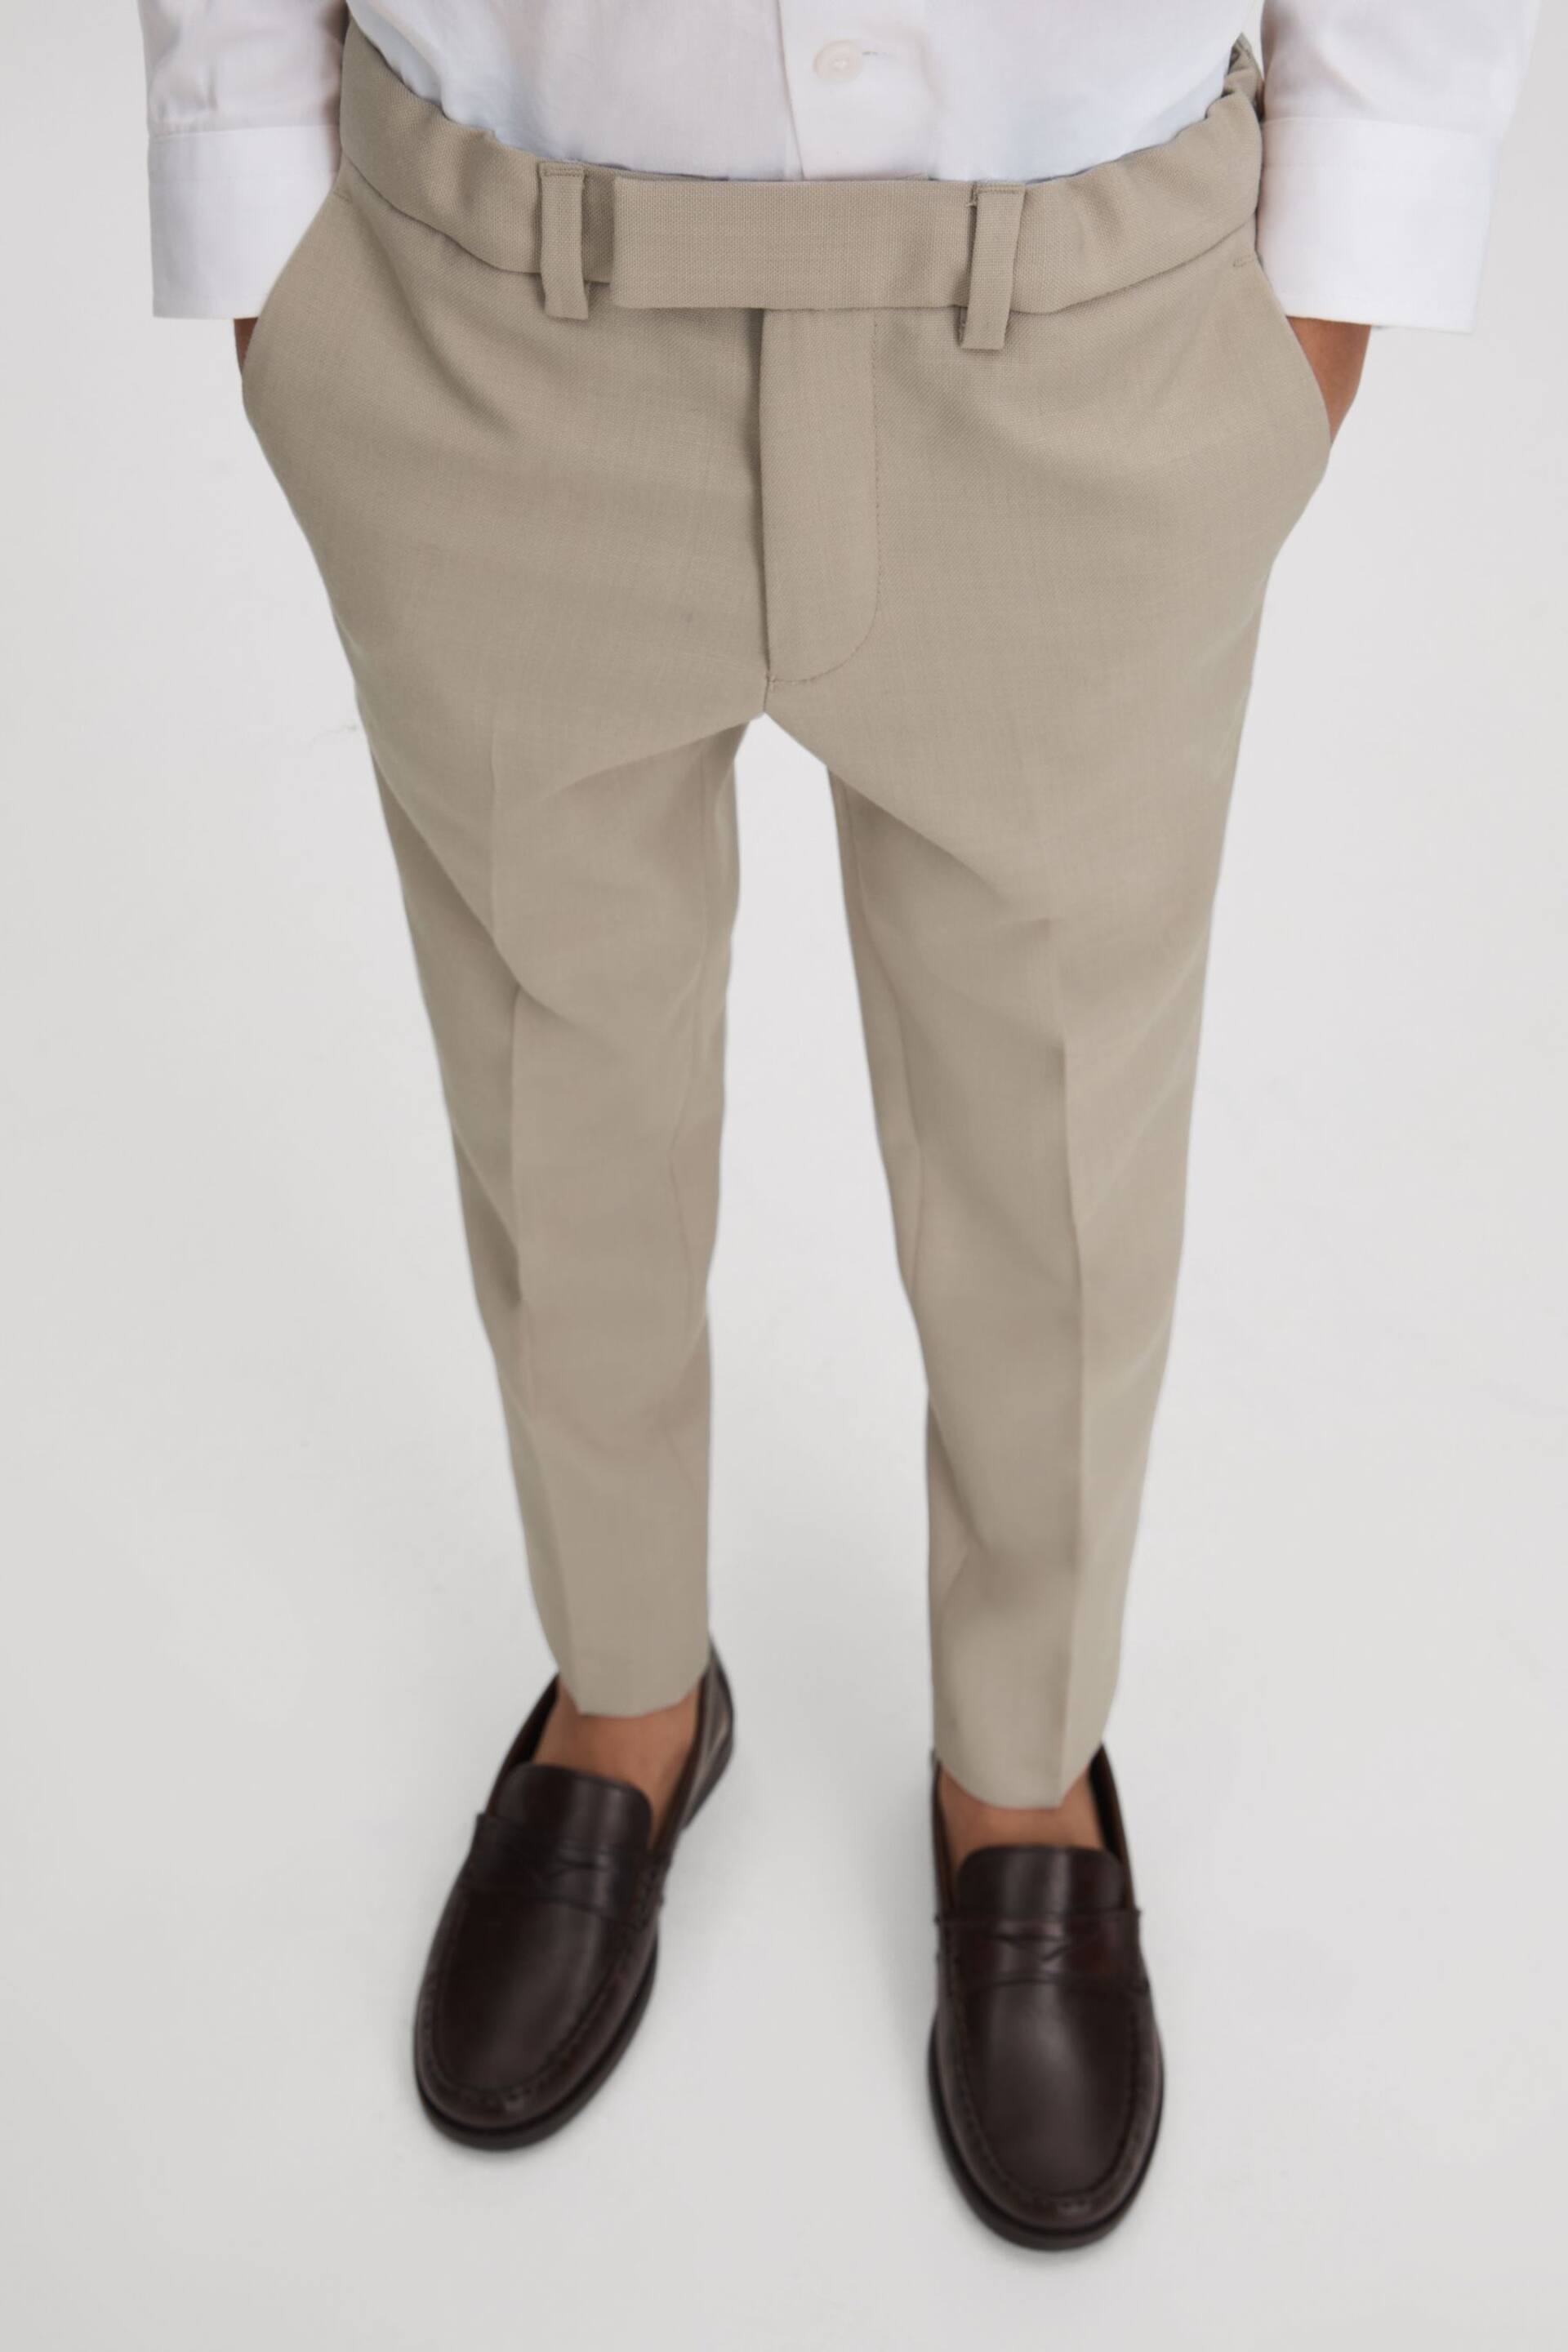 Reiss Stone Fine Senior Wool Side Adjusters Trousers - Image 3 of 4